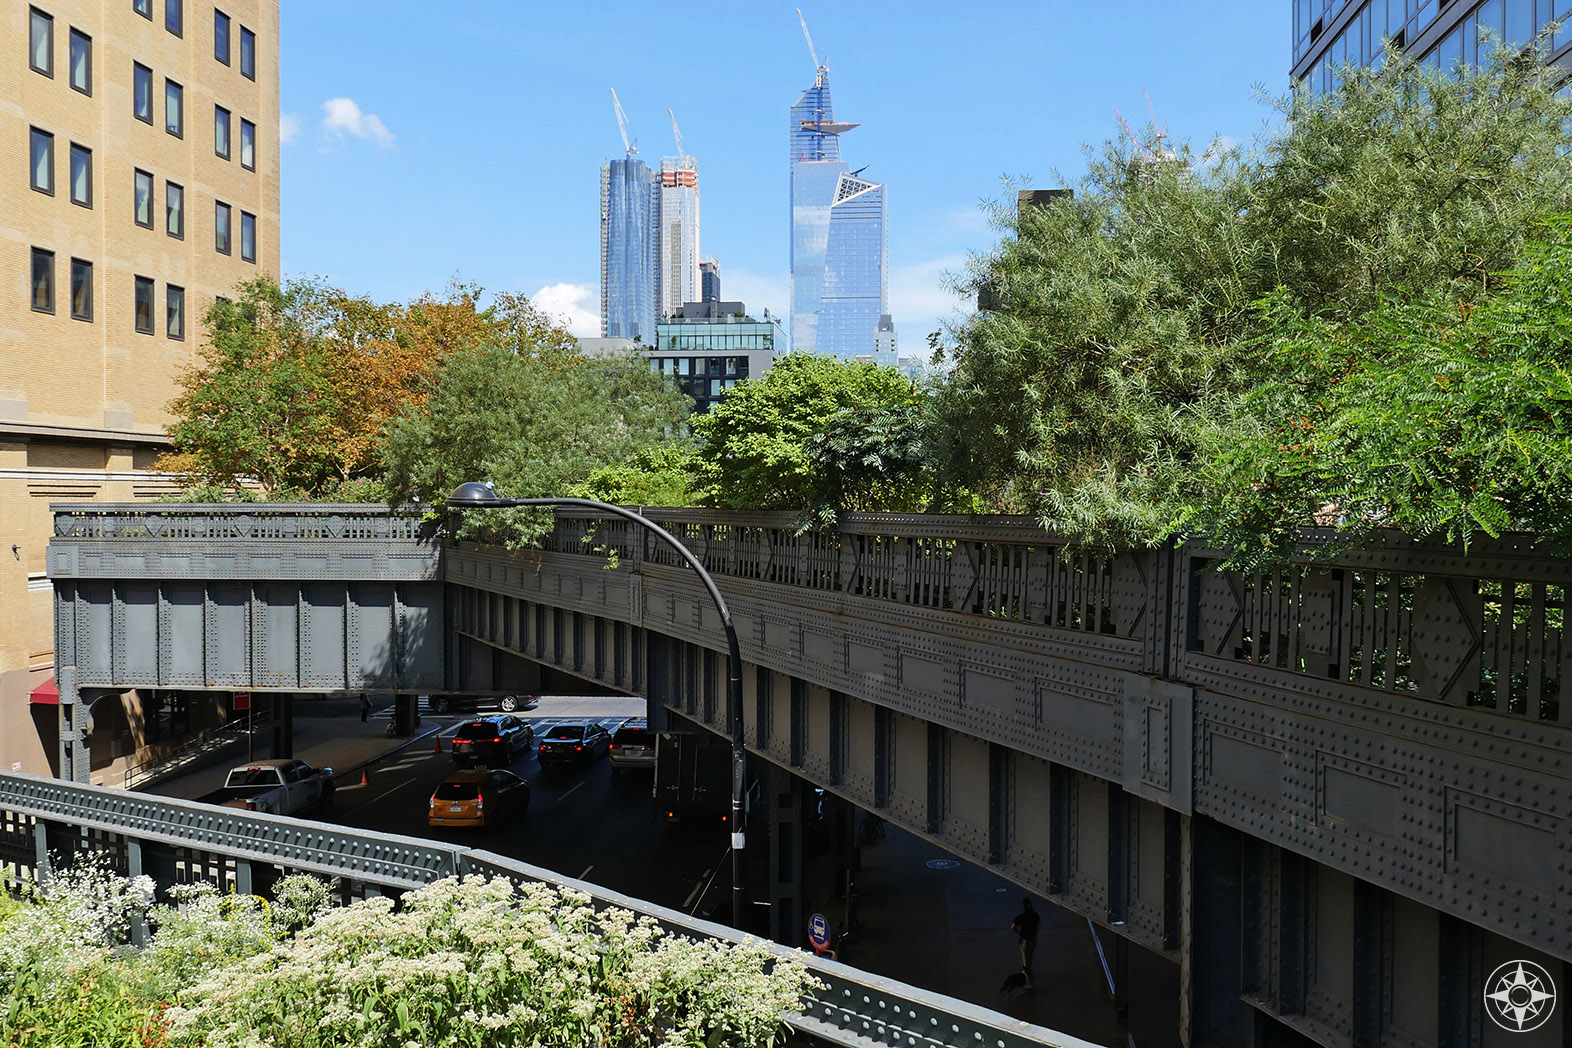 Above Grade: On the High Line